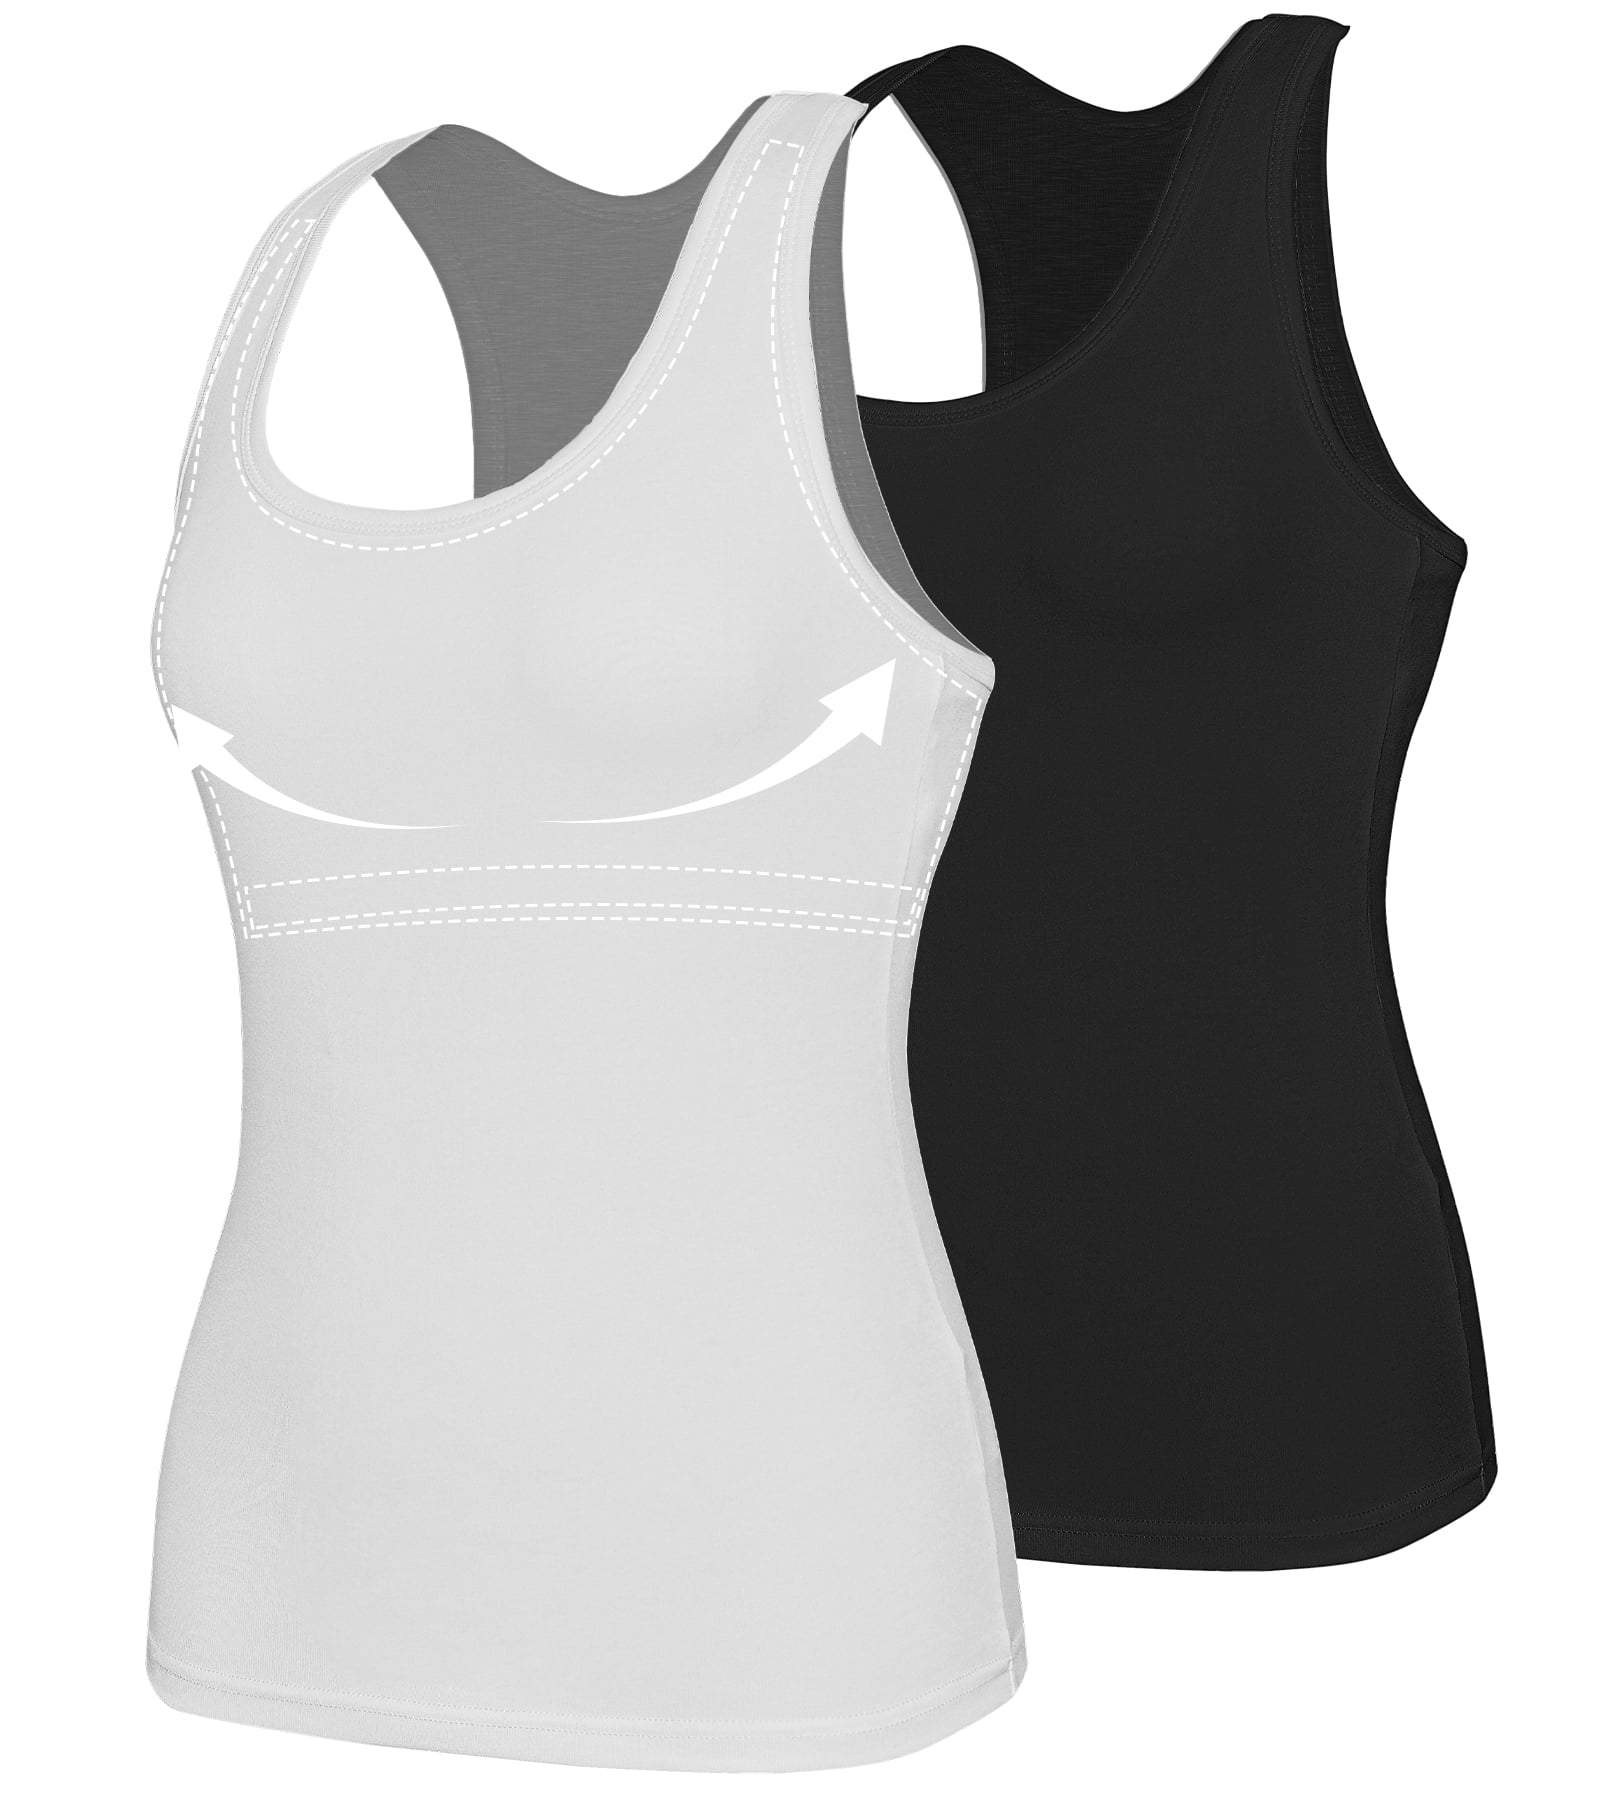 Anyfit Wear 2 Pack Racerback Workout Tank Tops With Shelf Bra for